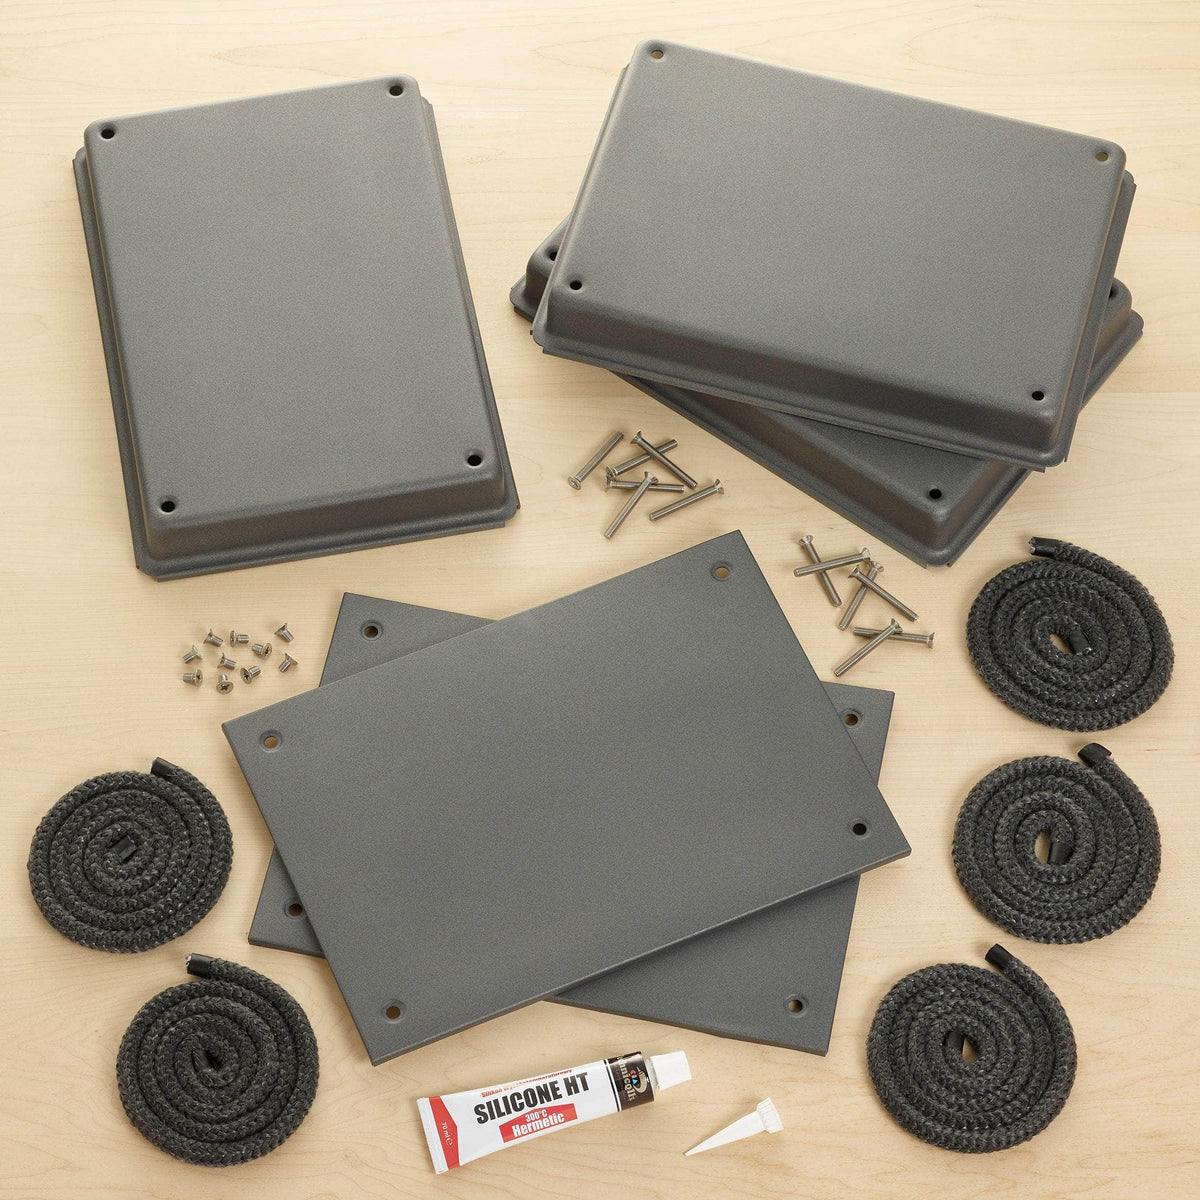 Non-stick door liners replacement kit for use with Aga range cookers 5 oven &#39;Deluxe&#39; (1974-present) / No insulation upgrade thank you / No extra tools required thank you